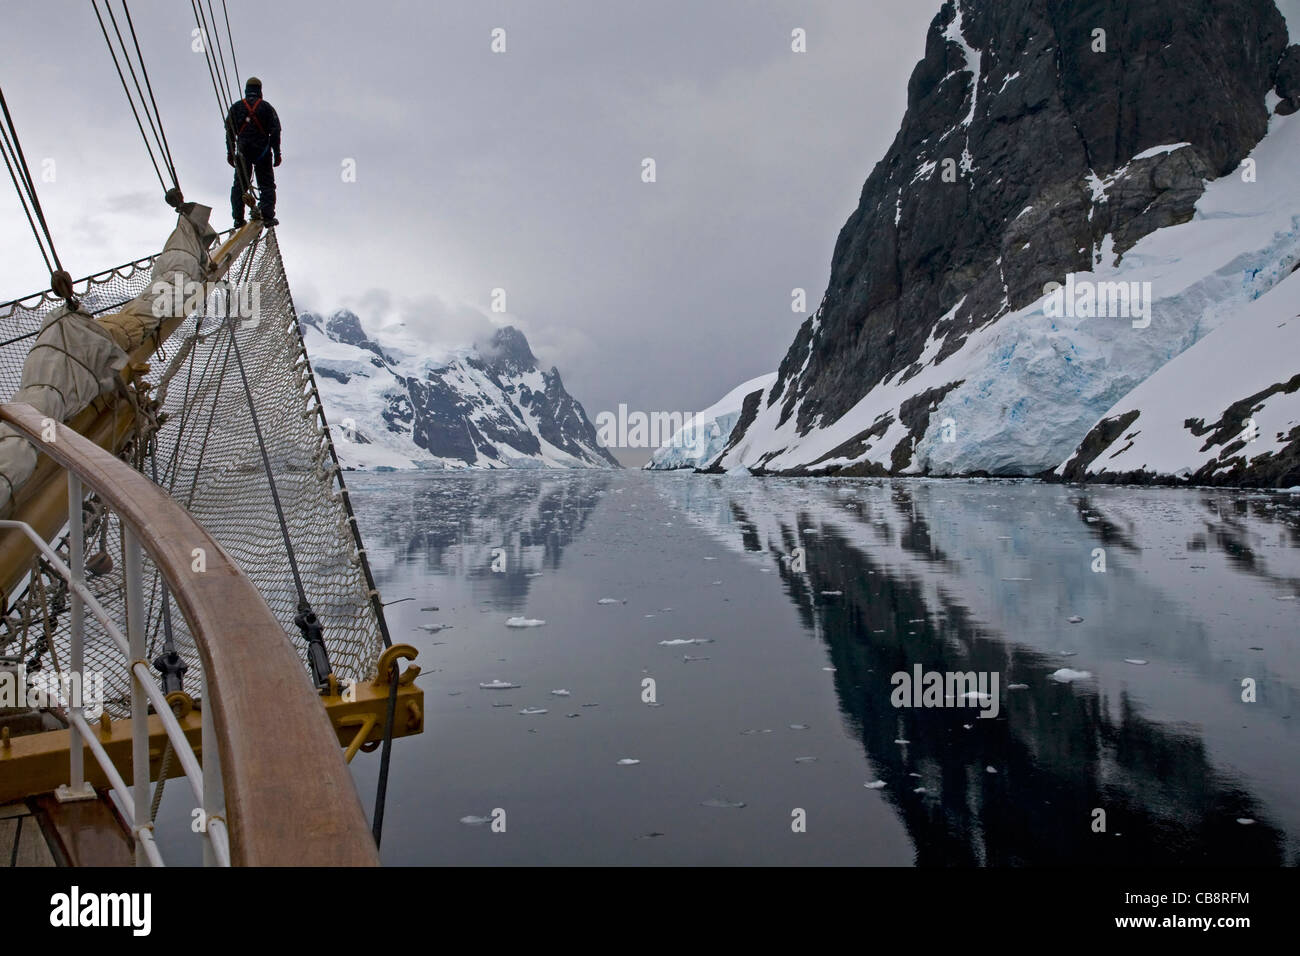 Sailing ship with man on bowsprit looking into the Lemaire Channel / Kodak Gap, Antarctica Stock Photo